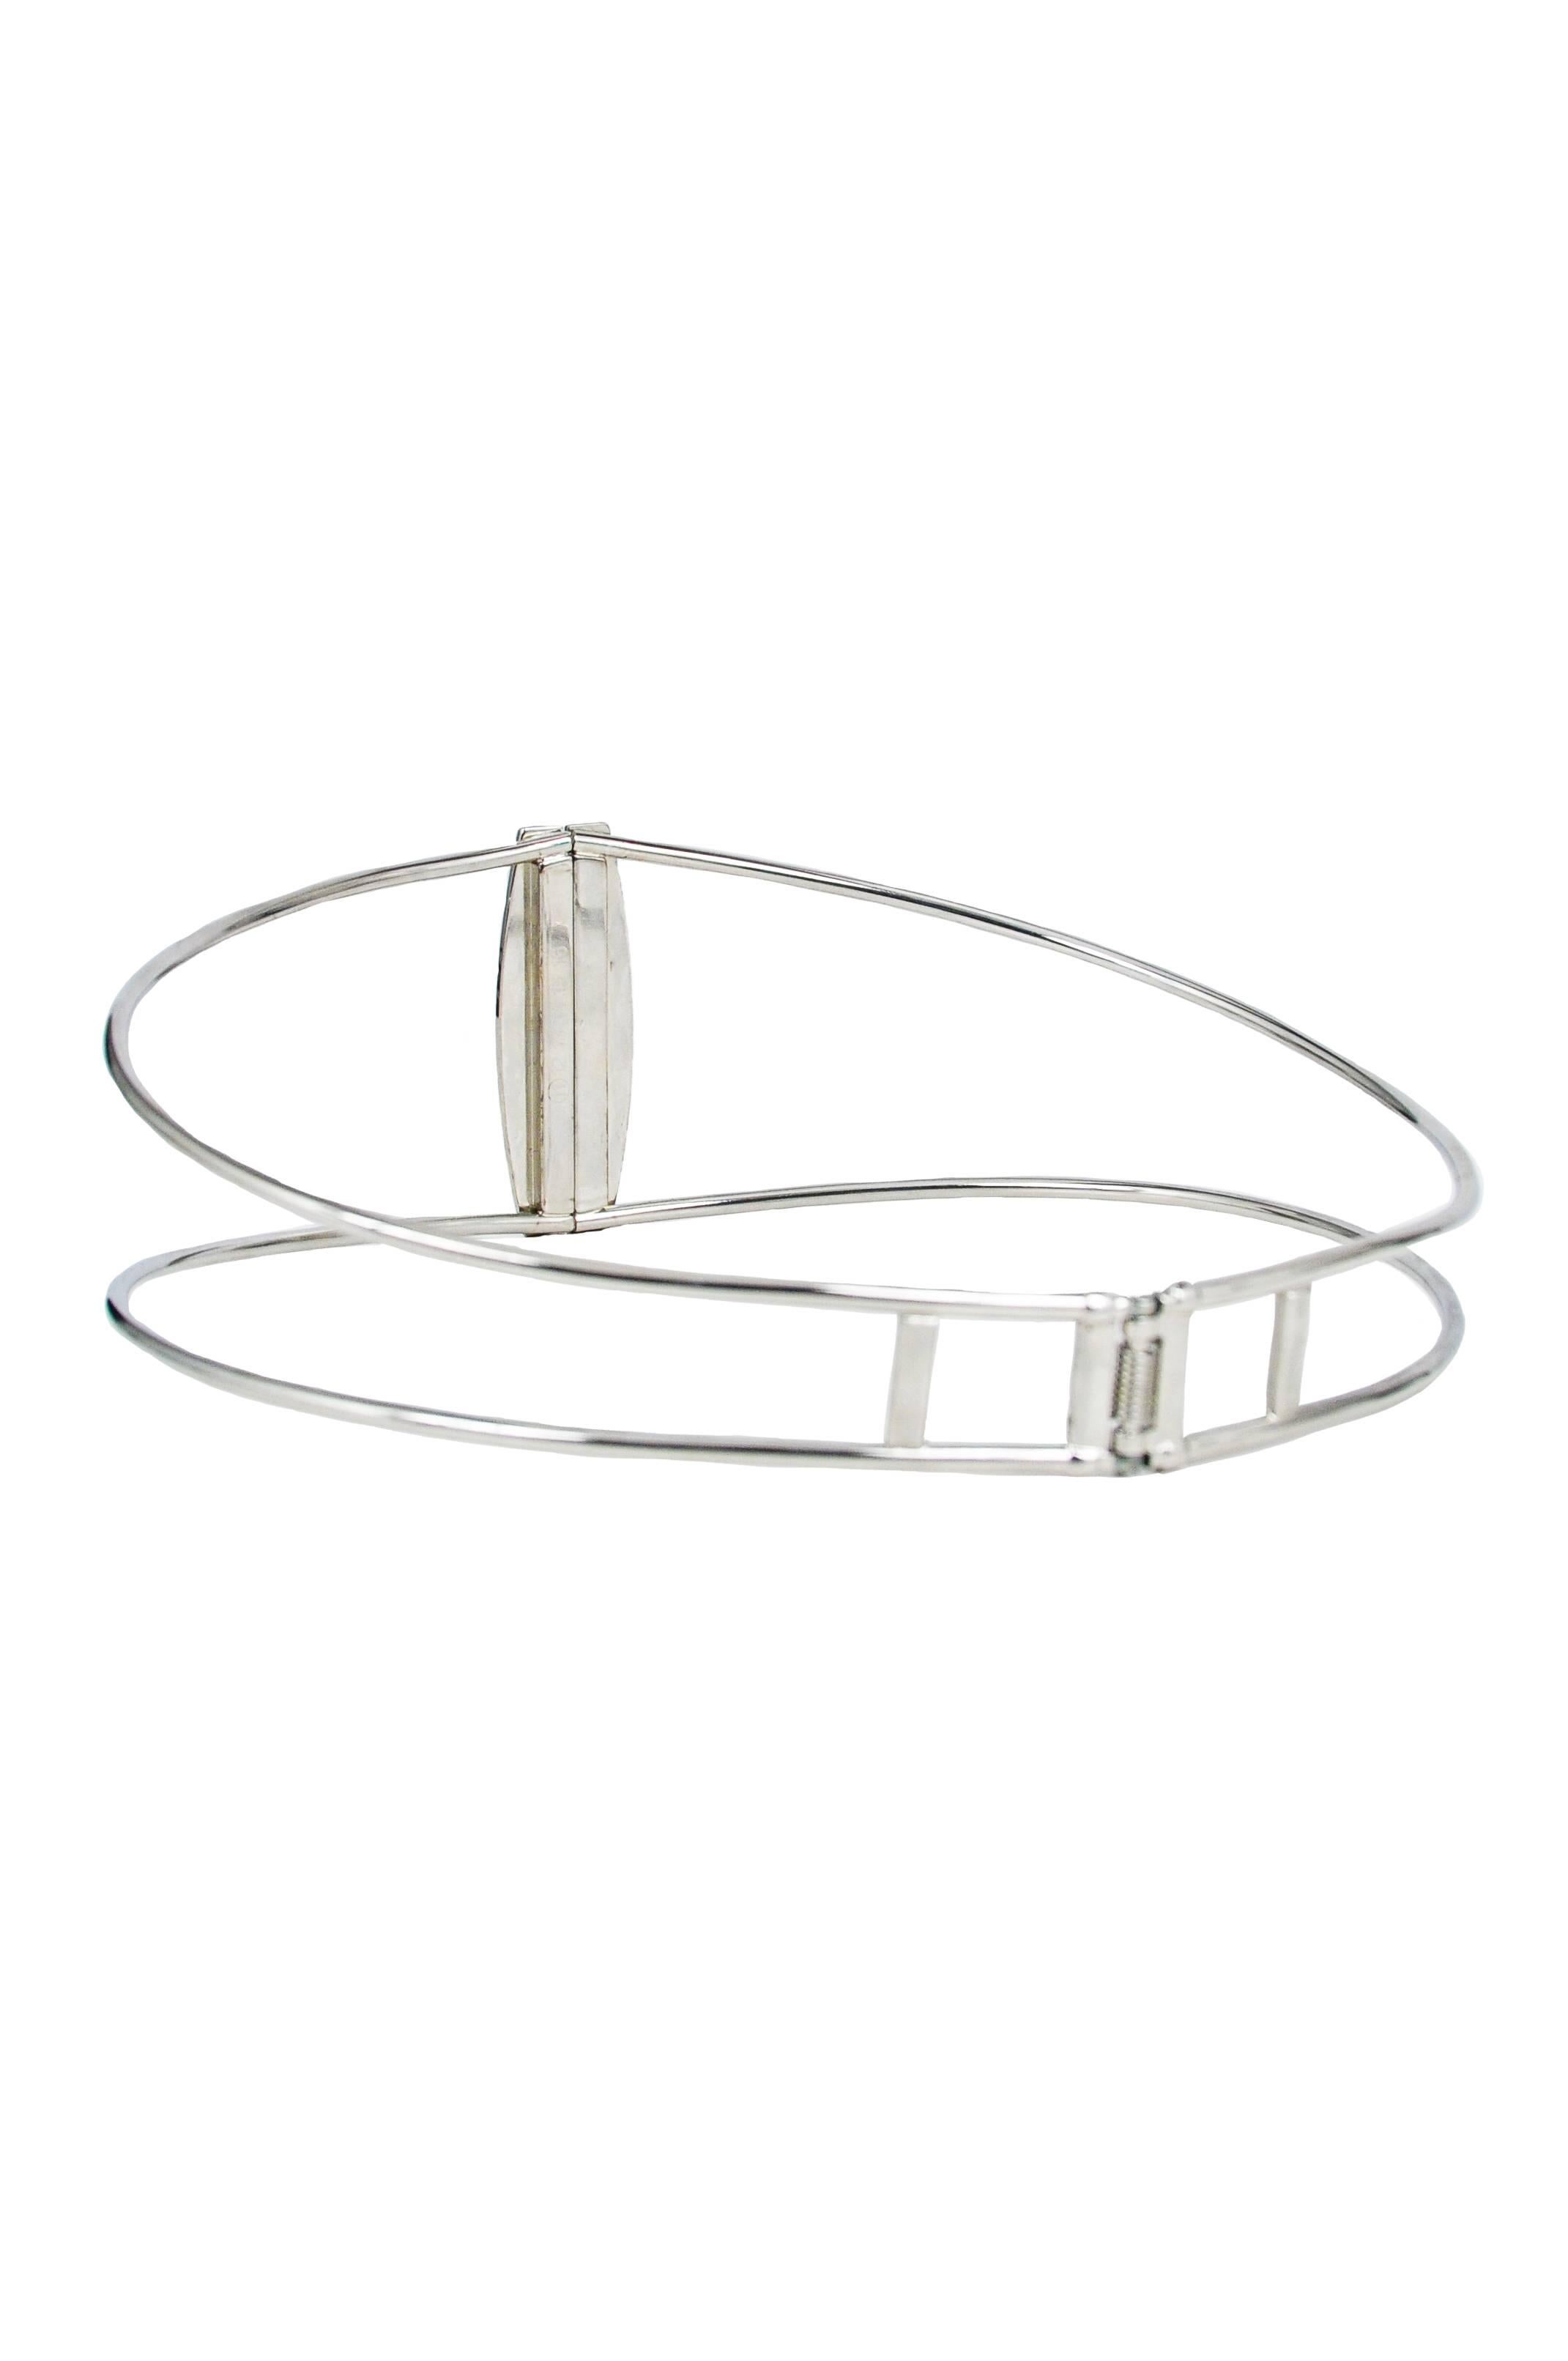 Maison Martin Margiela Metal Wire Cage Belt In Good Condition For Sale In Los Angeles, CA